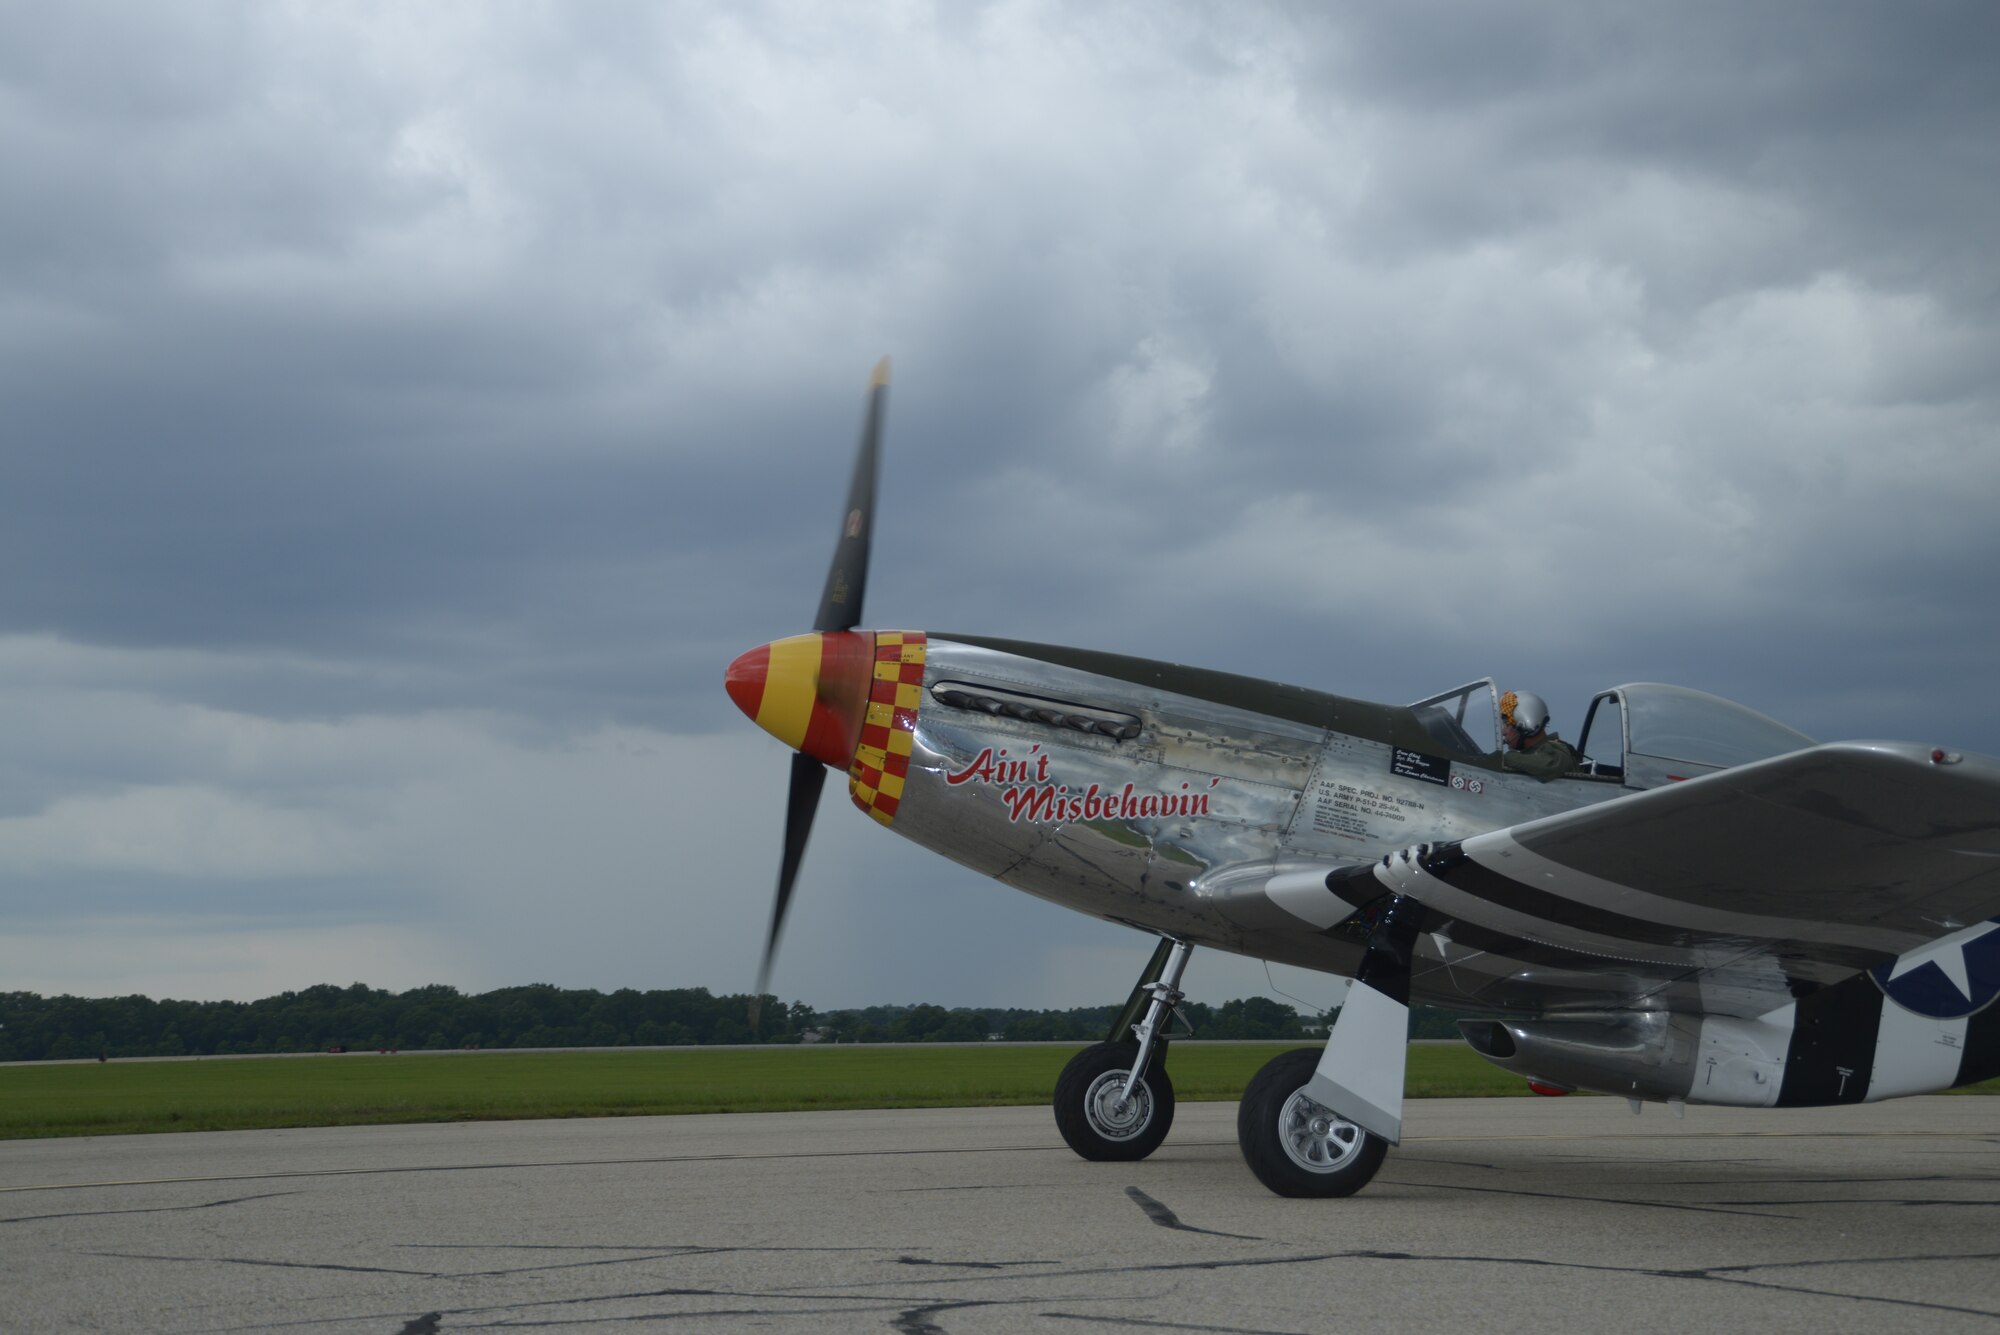 Col. Clarence “Bud” Anderson (retired)  prepares for take-off in a P-51 Mustang during the Gathering of Eagles annual event at Maxwell Air Force Base, June 6, 2014. The P-51 mustang was brought in for the day to honor Anderson, a triple Ace from WWII, on the 70th anniversary of the allied invasion of Normandy known as D-Day, in which he flew. (U.S. Air Force photo by Staff Sgt. Gregory Brook)